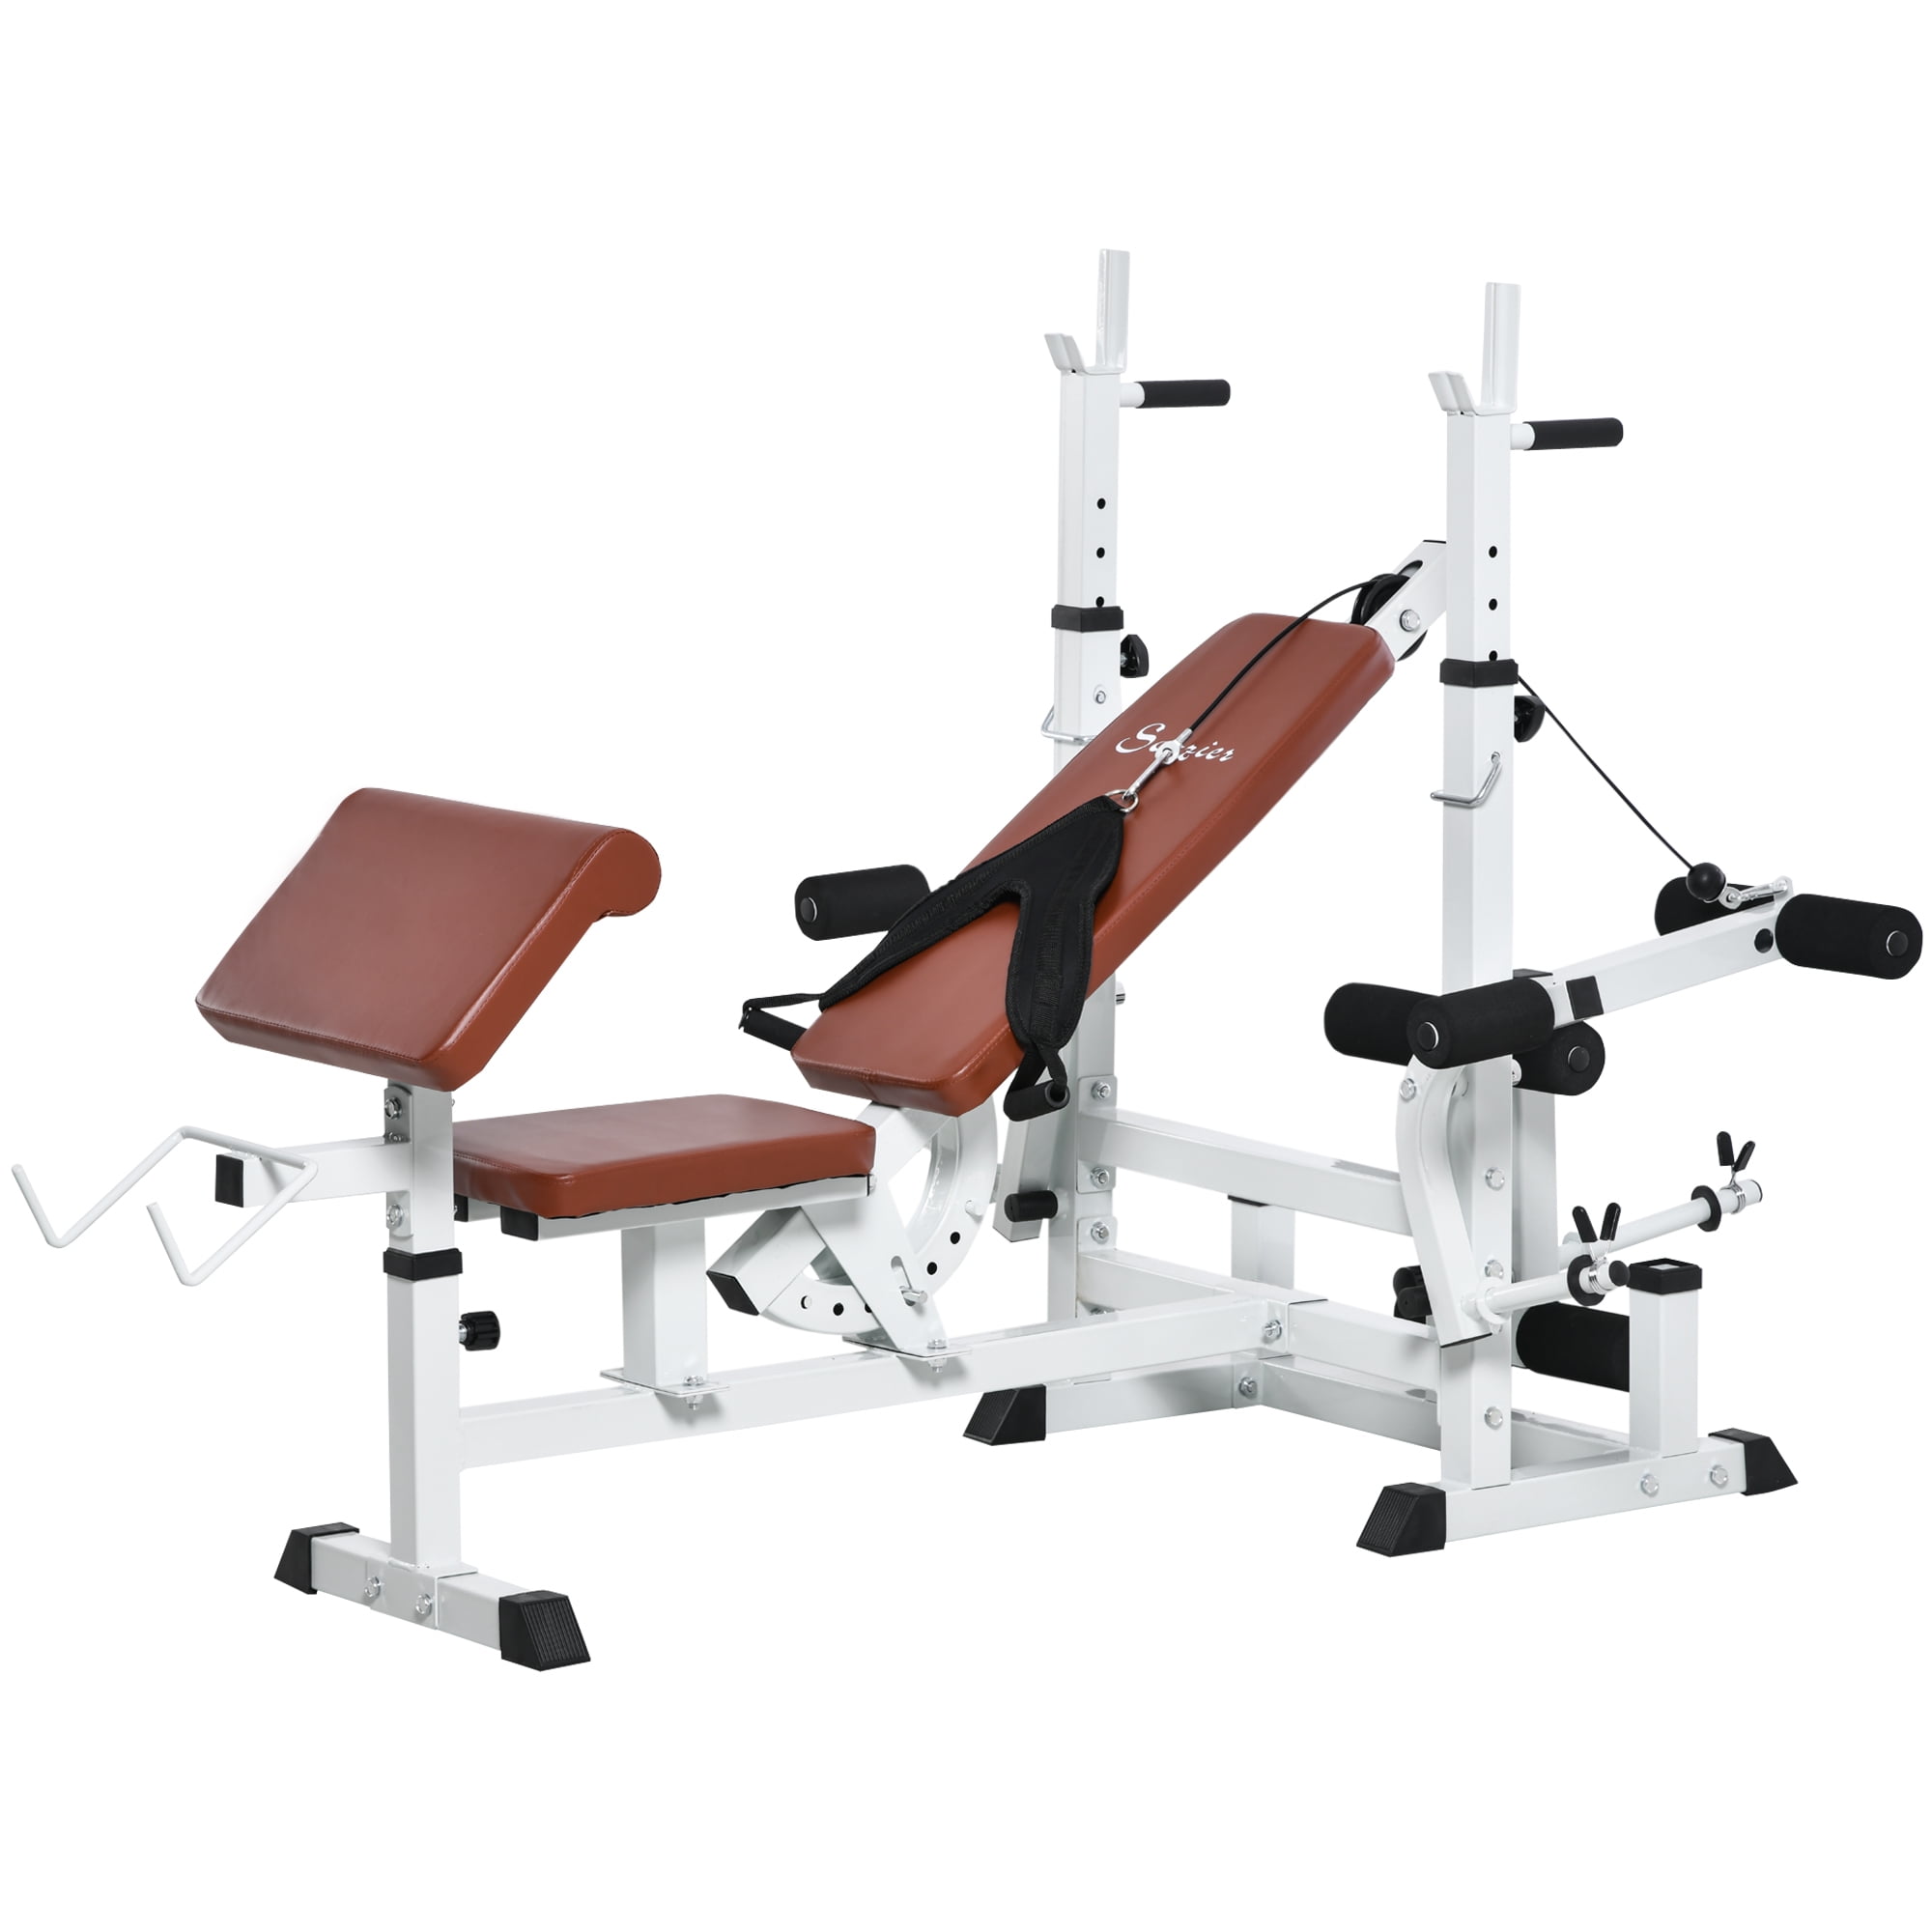 Curl Fly with Extension, Soozier Full-Body and Weight Band Chest Leg Bench Rack Preacher Multi-Exercise Press, Resistance